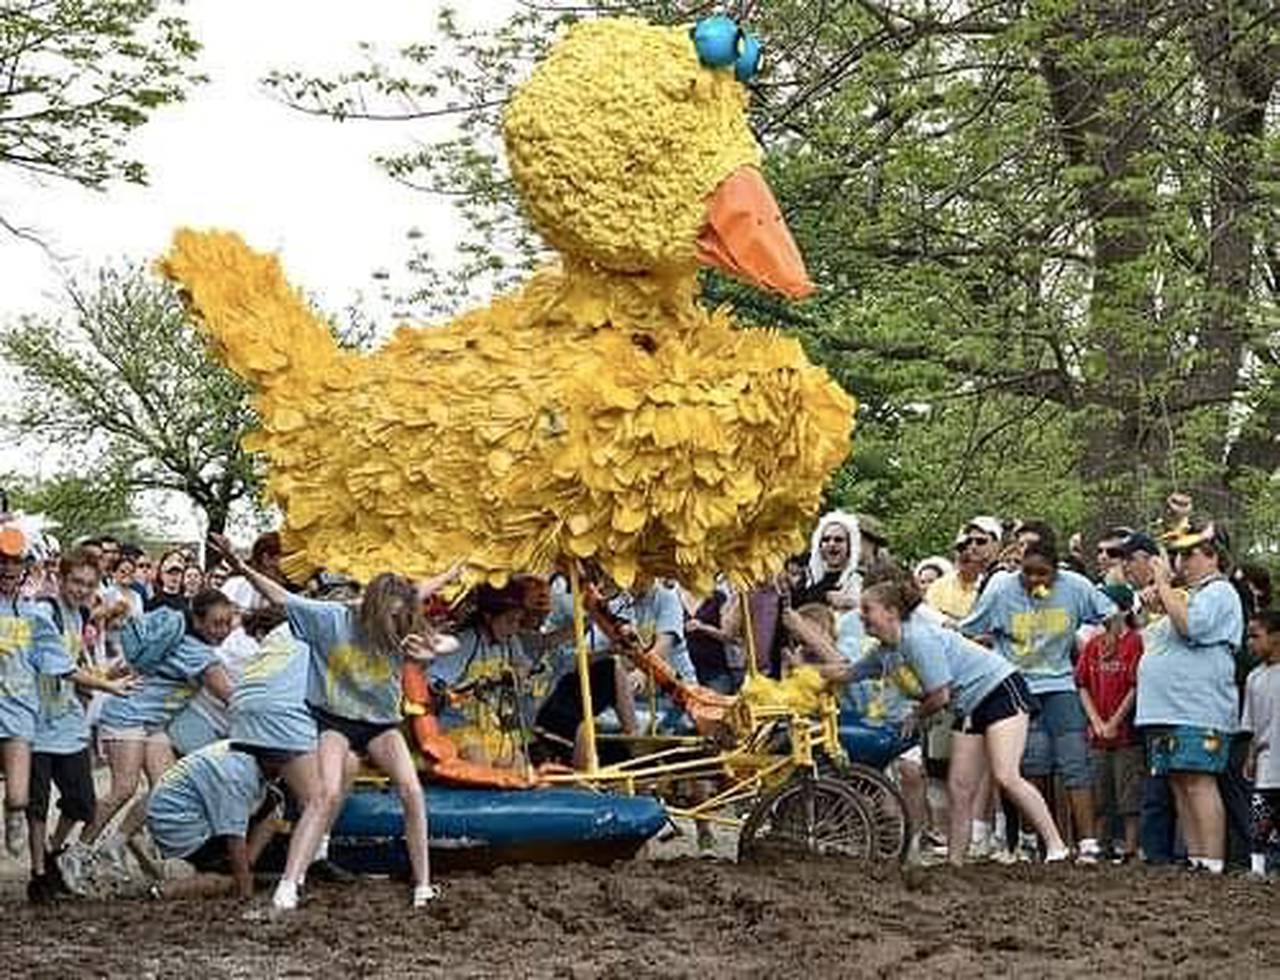 Daley the Duck is pushed through the mud pit, with author Kaitlin Newman is in the front to the left, about to slip and fall. (photo courtesy of Ian Macdonald via the KSR, May 2003)